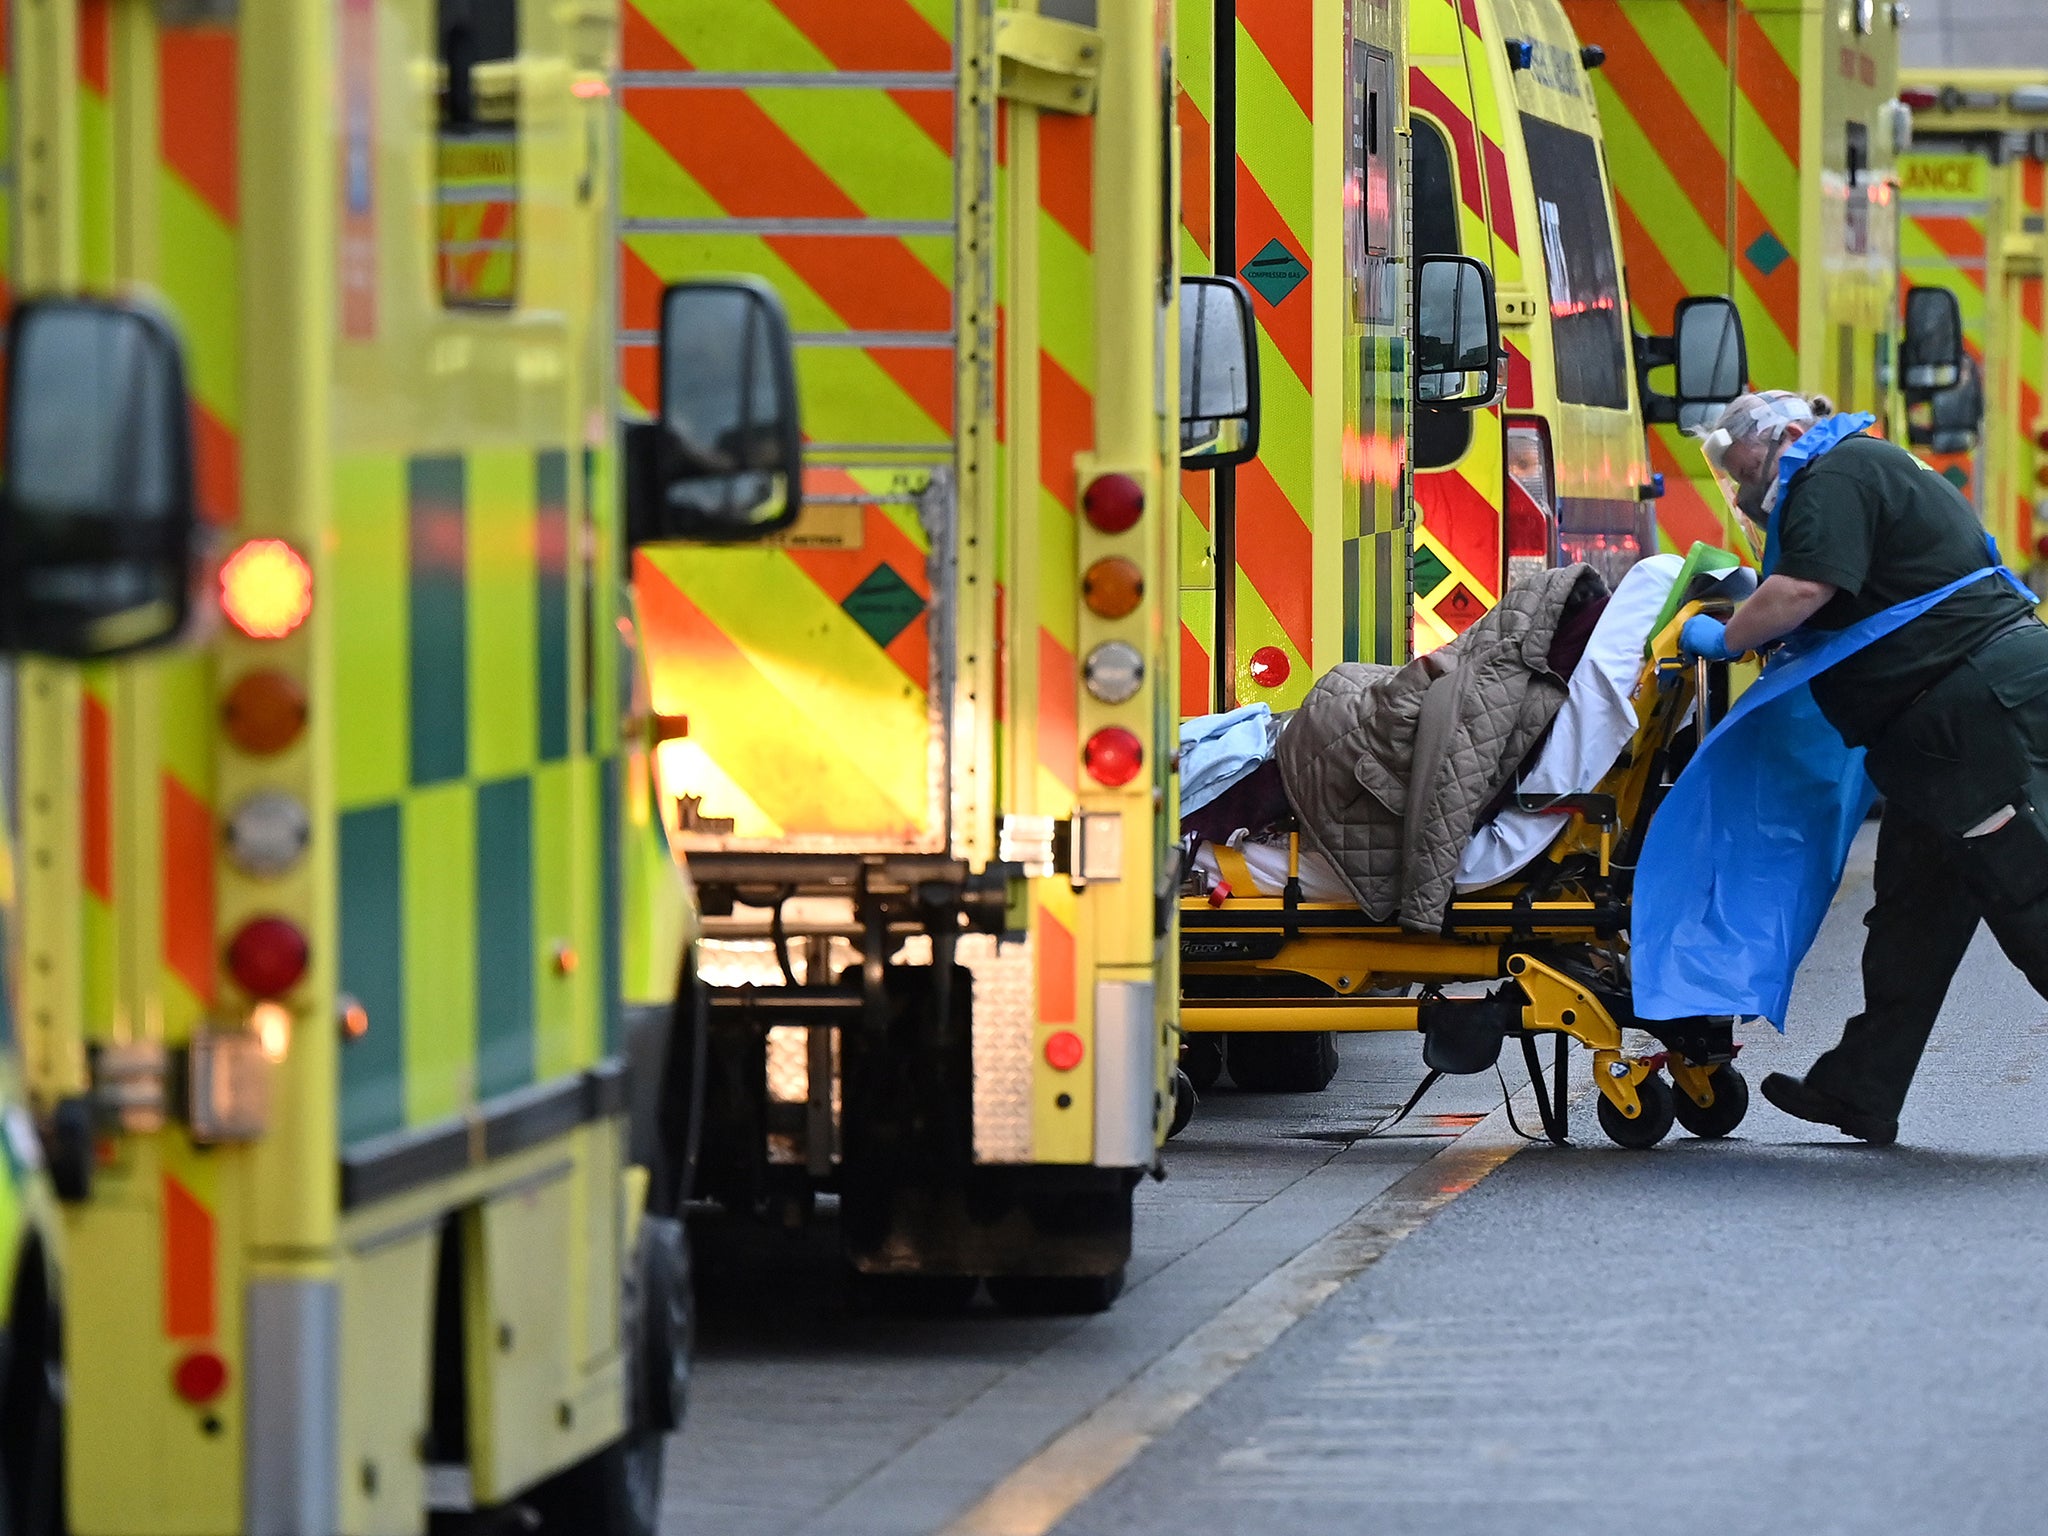 Ambulance services are experiencing handover delays at hospital emergency departments